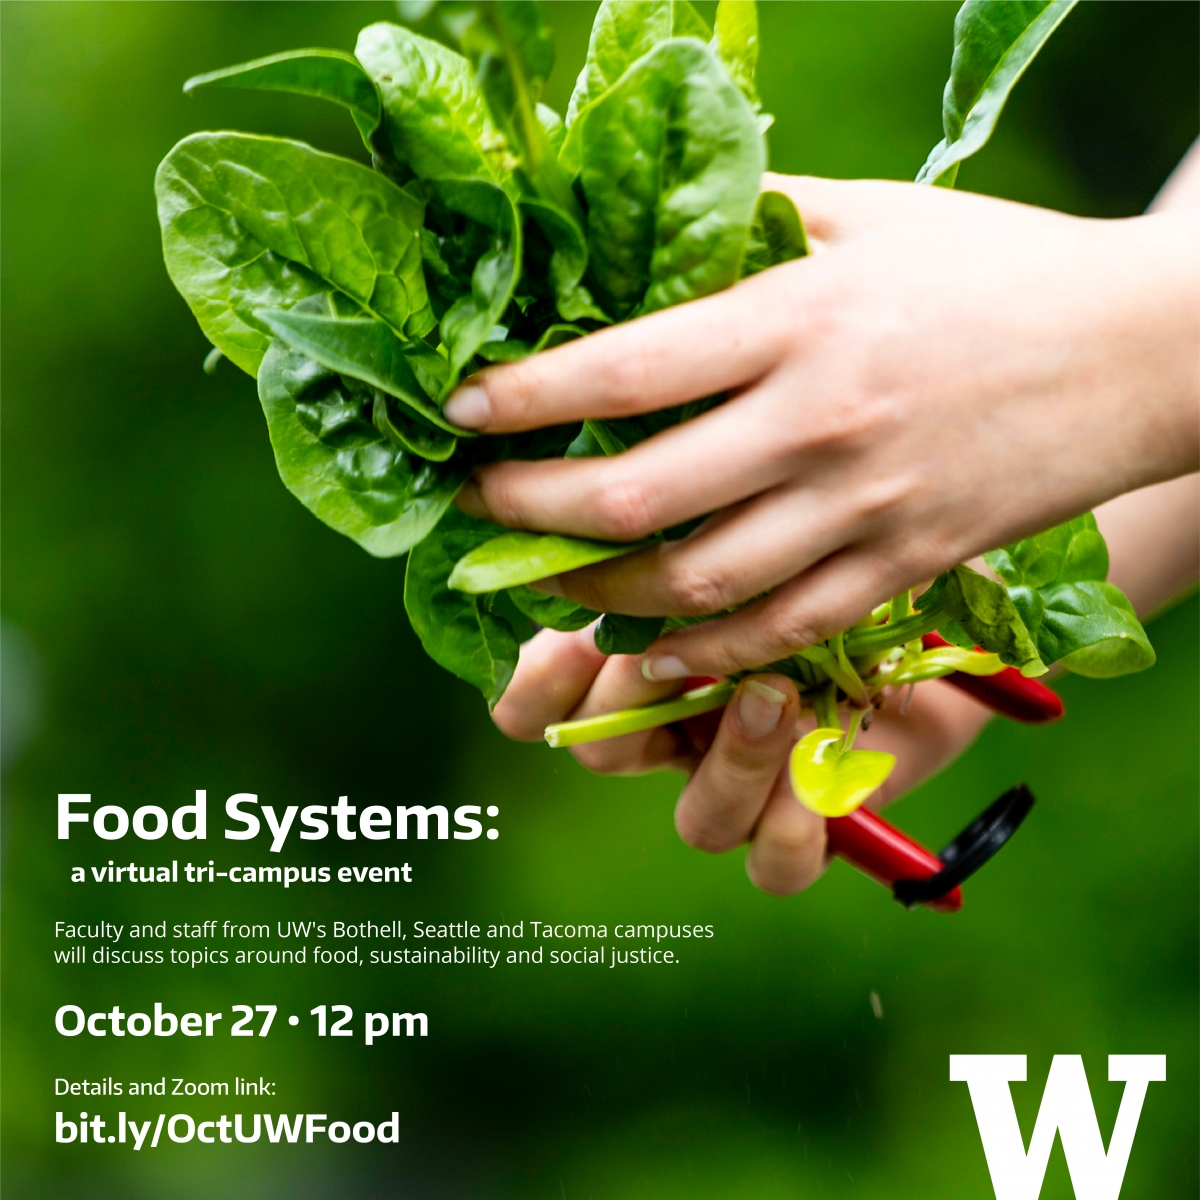 Food systems event poster